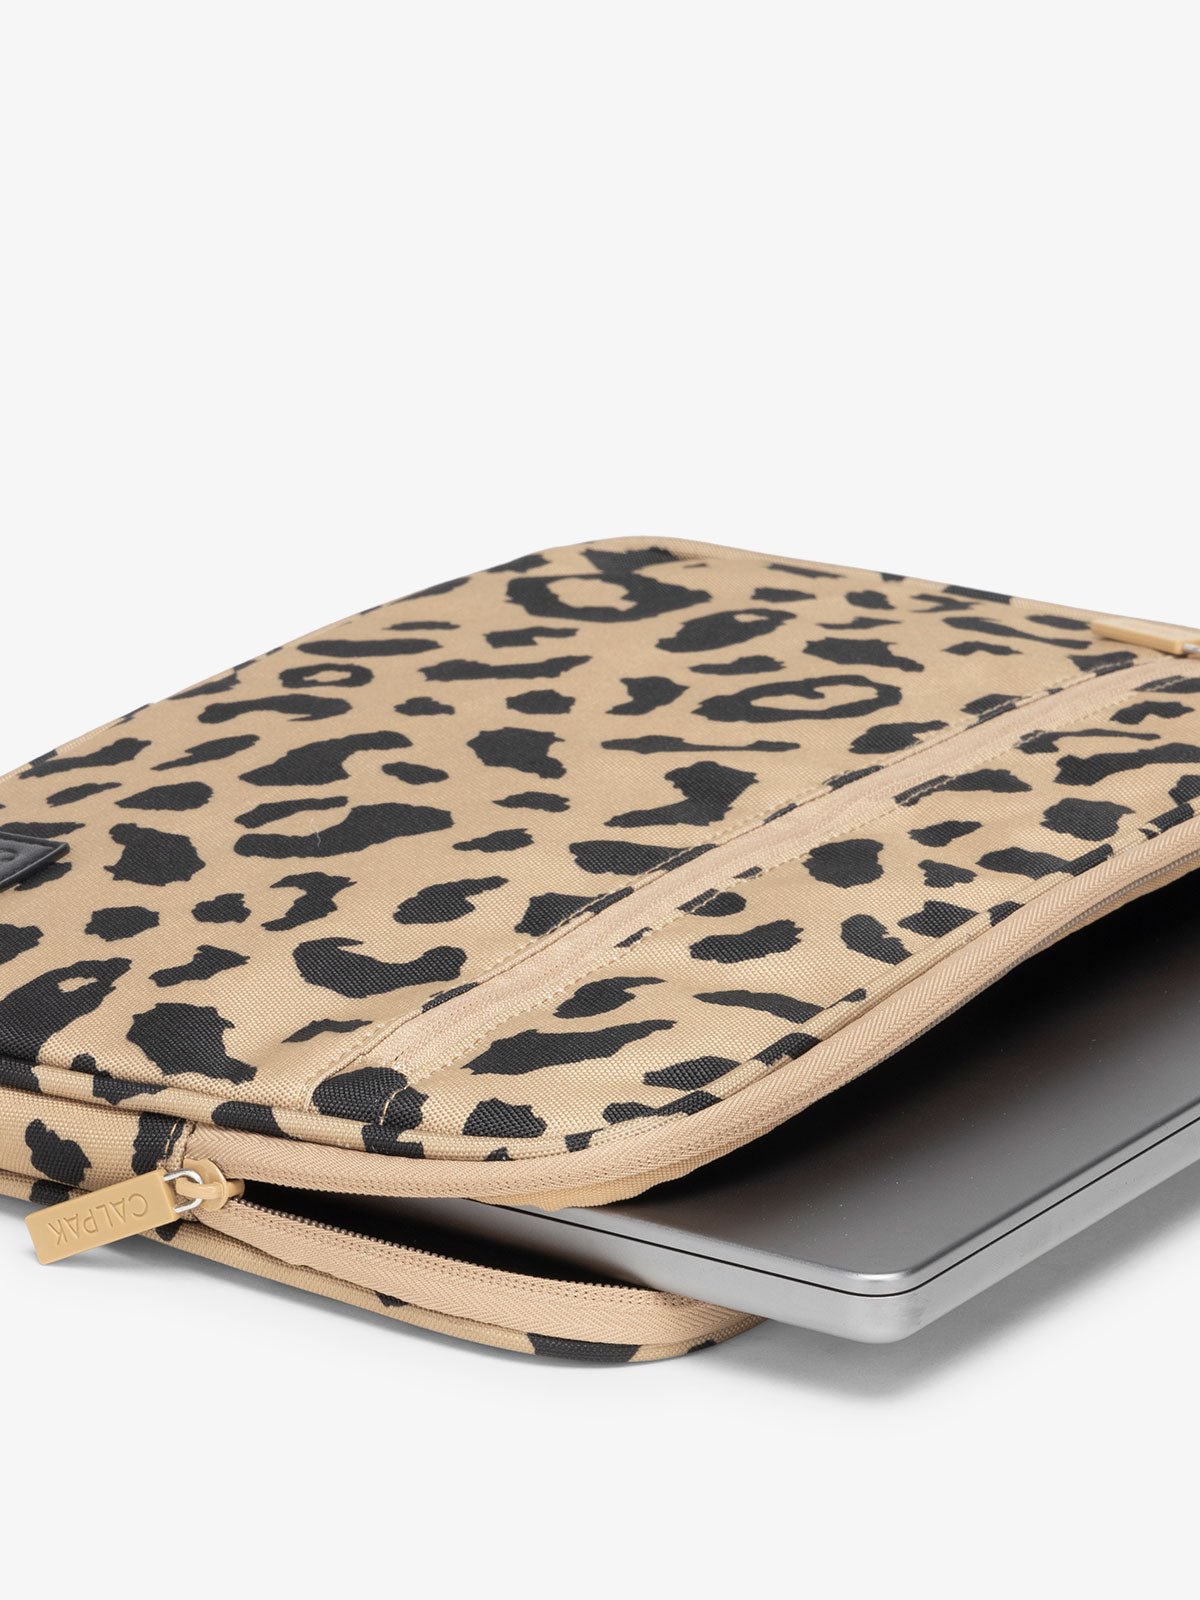 CALPAK 15-17" laptop sleeve with front zipper pouch in cheetah print